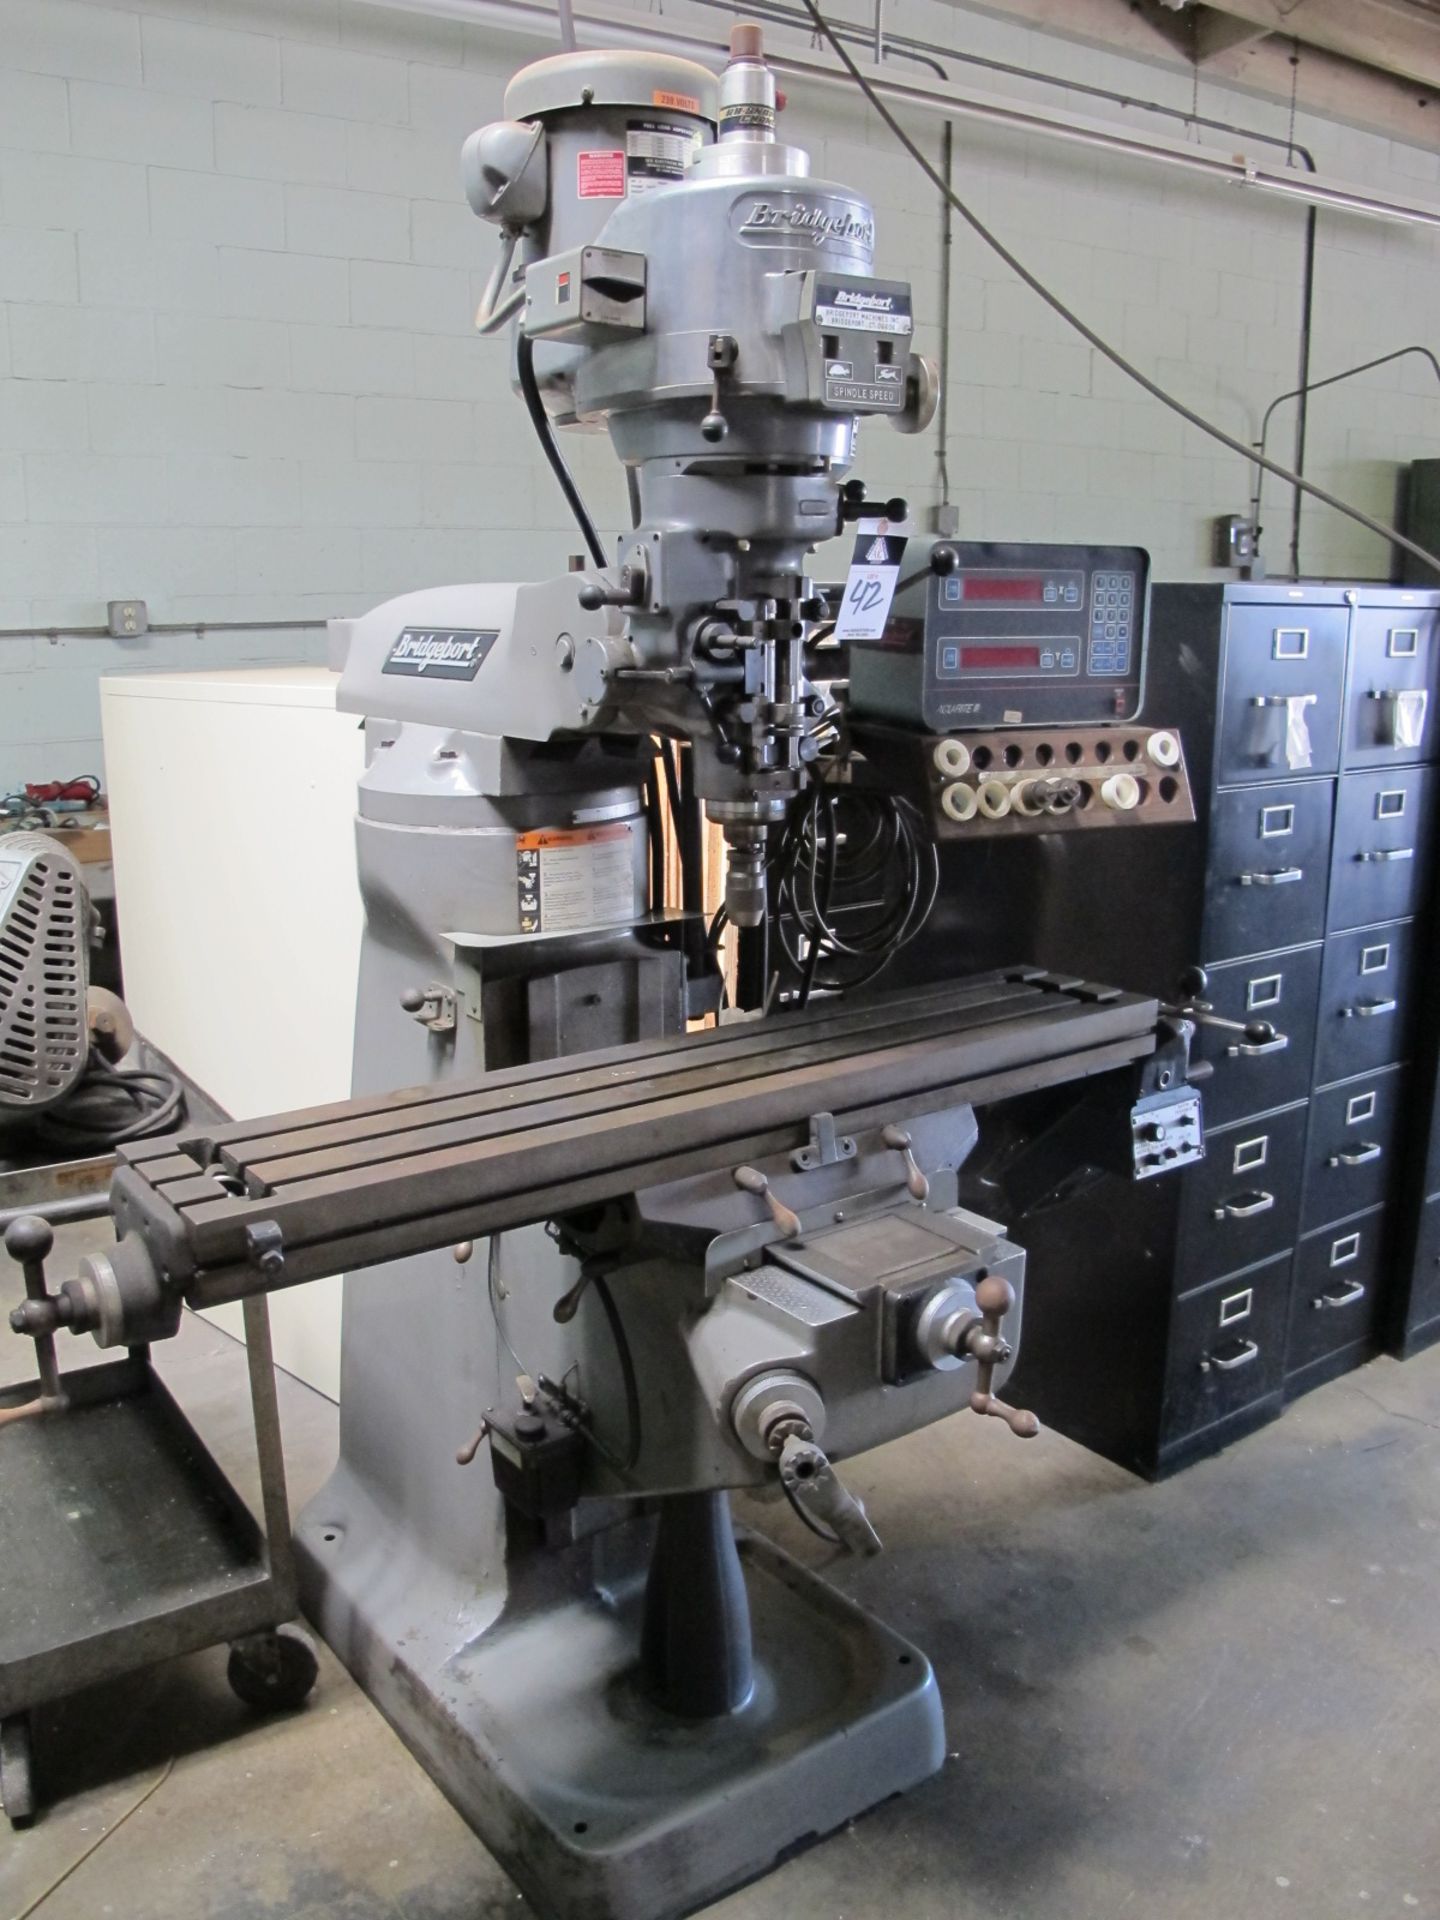 BridgeportSeries 1-2hp Vertical Mill W/DRO 60-4500 Dial Change RPM Crome ways, Power Feed - Image 2 of 6